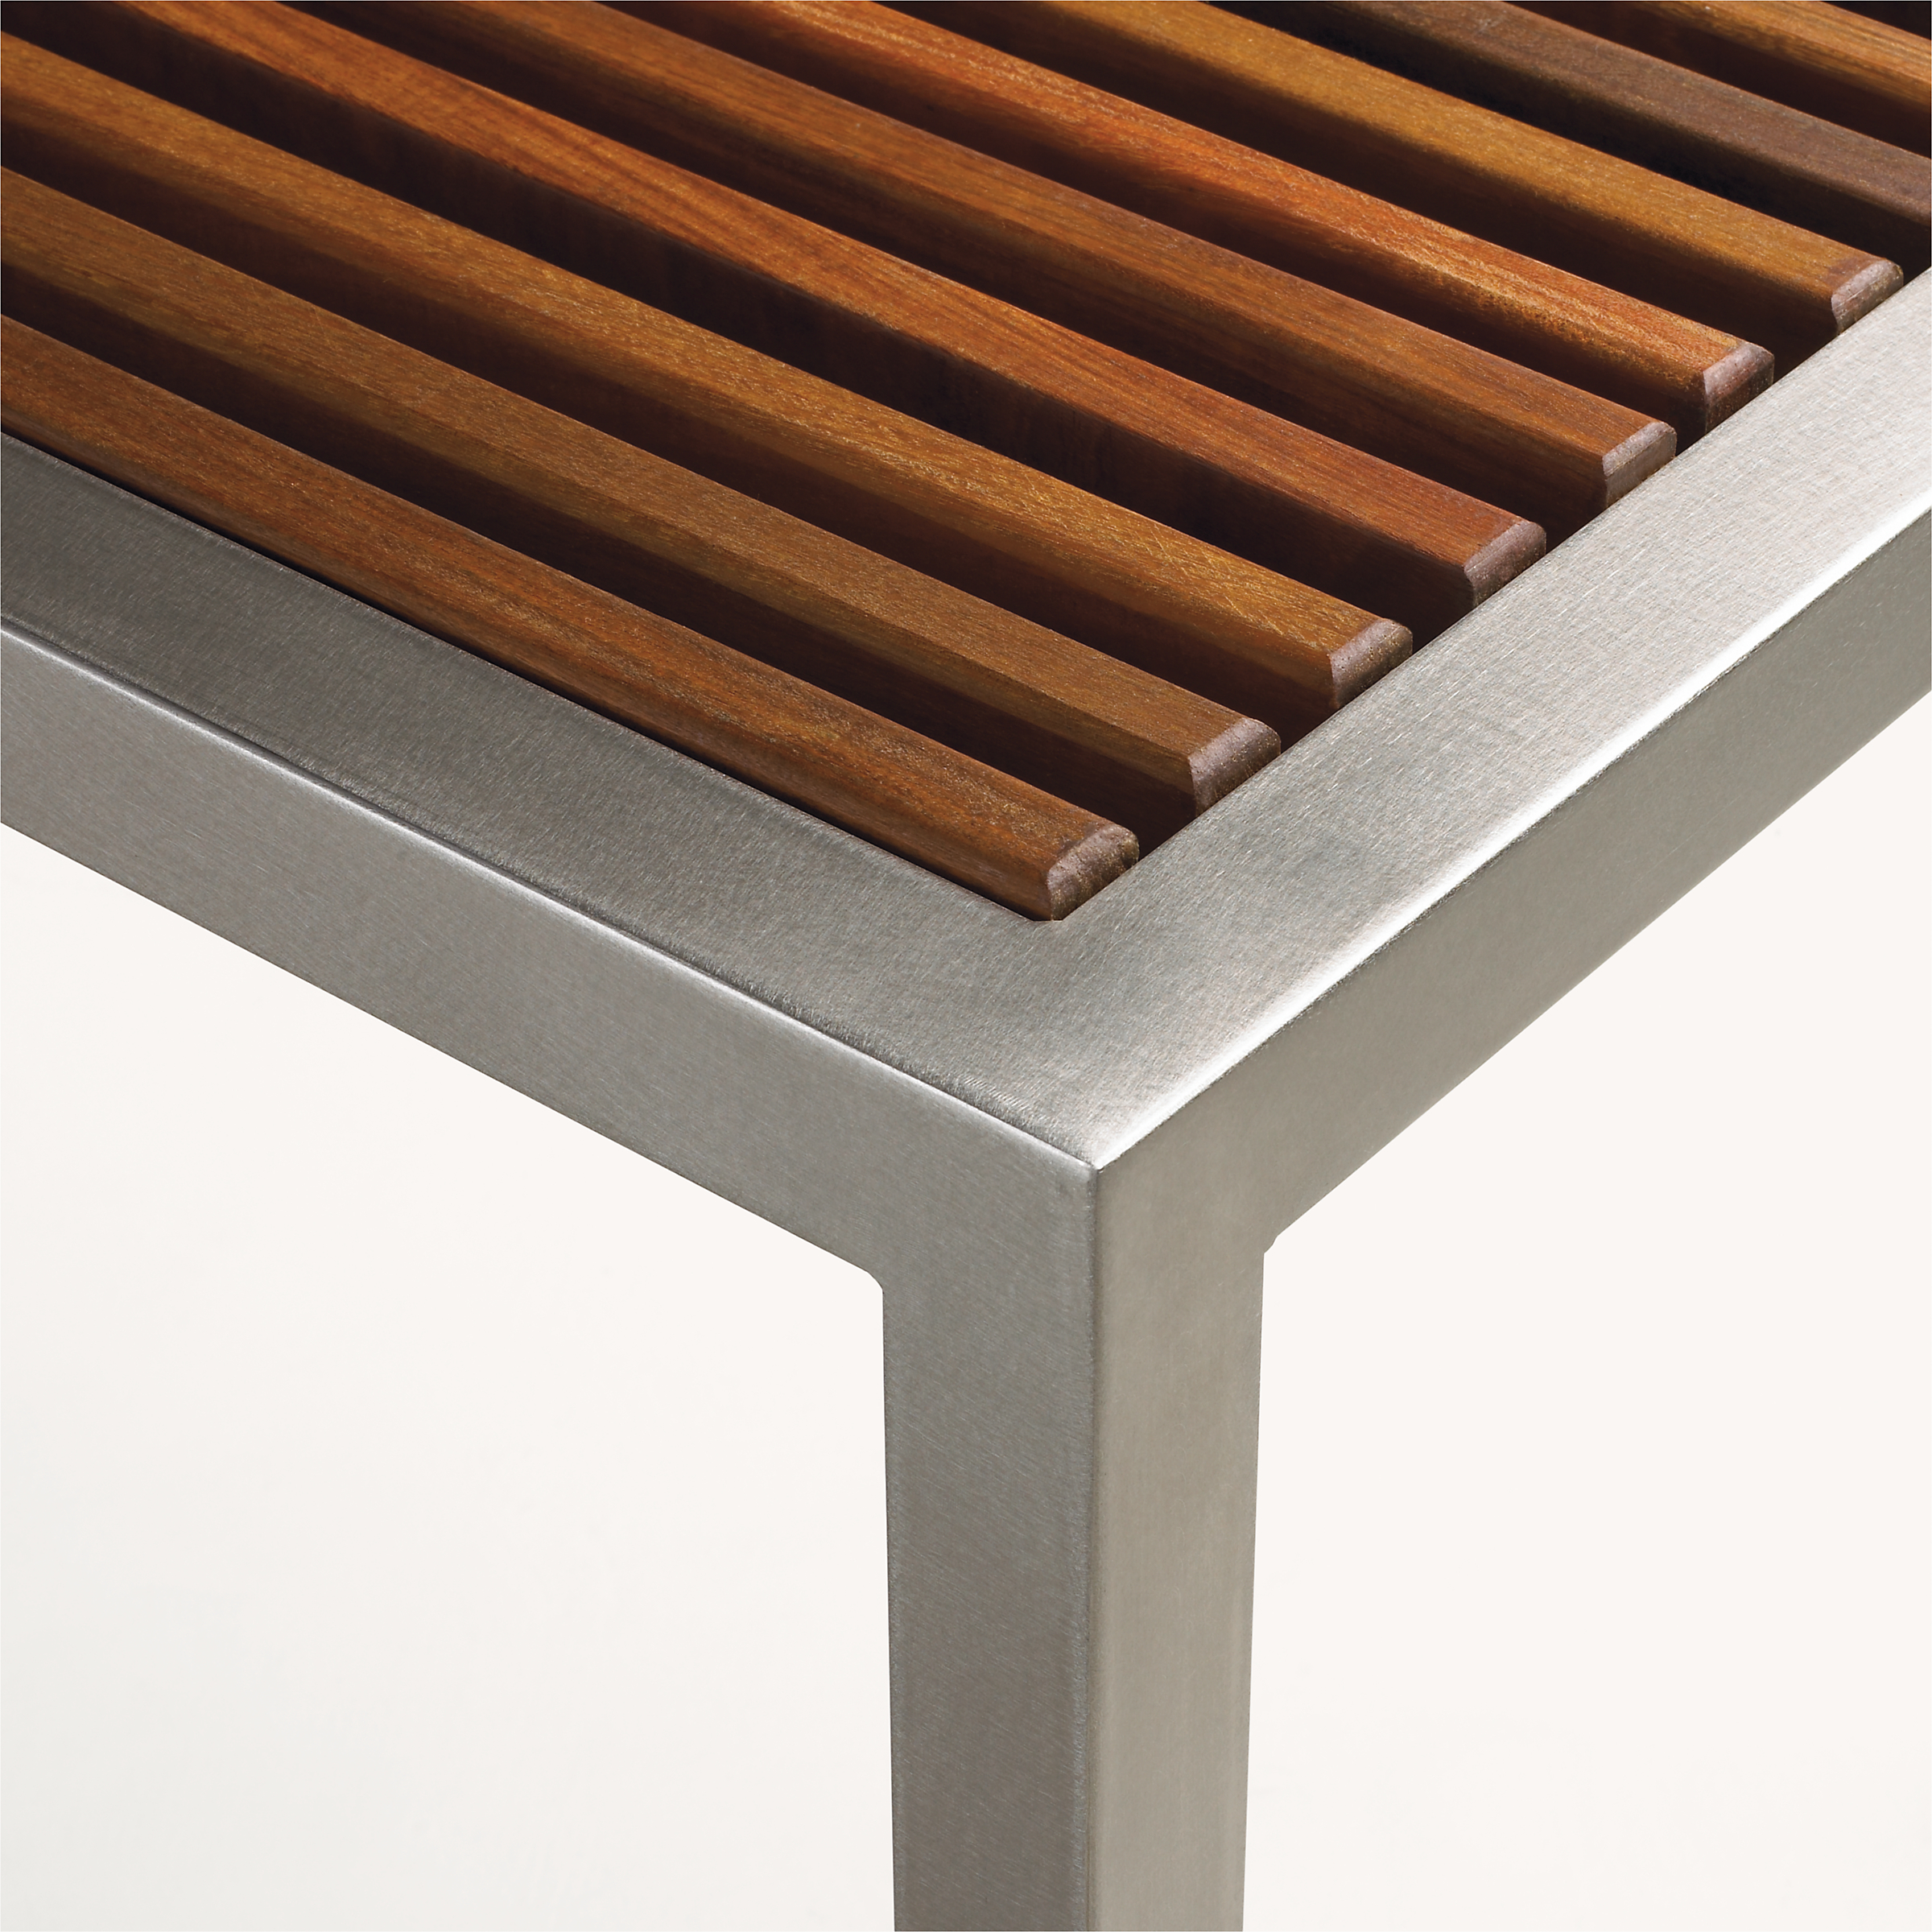 corner detail of Montego 54-wide Bench in new Reclaimed Ash and stainless steel frame.